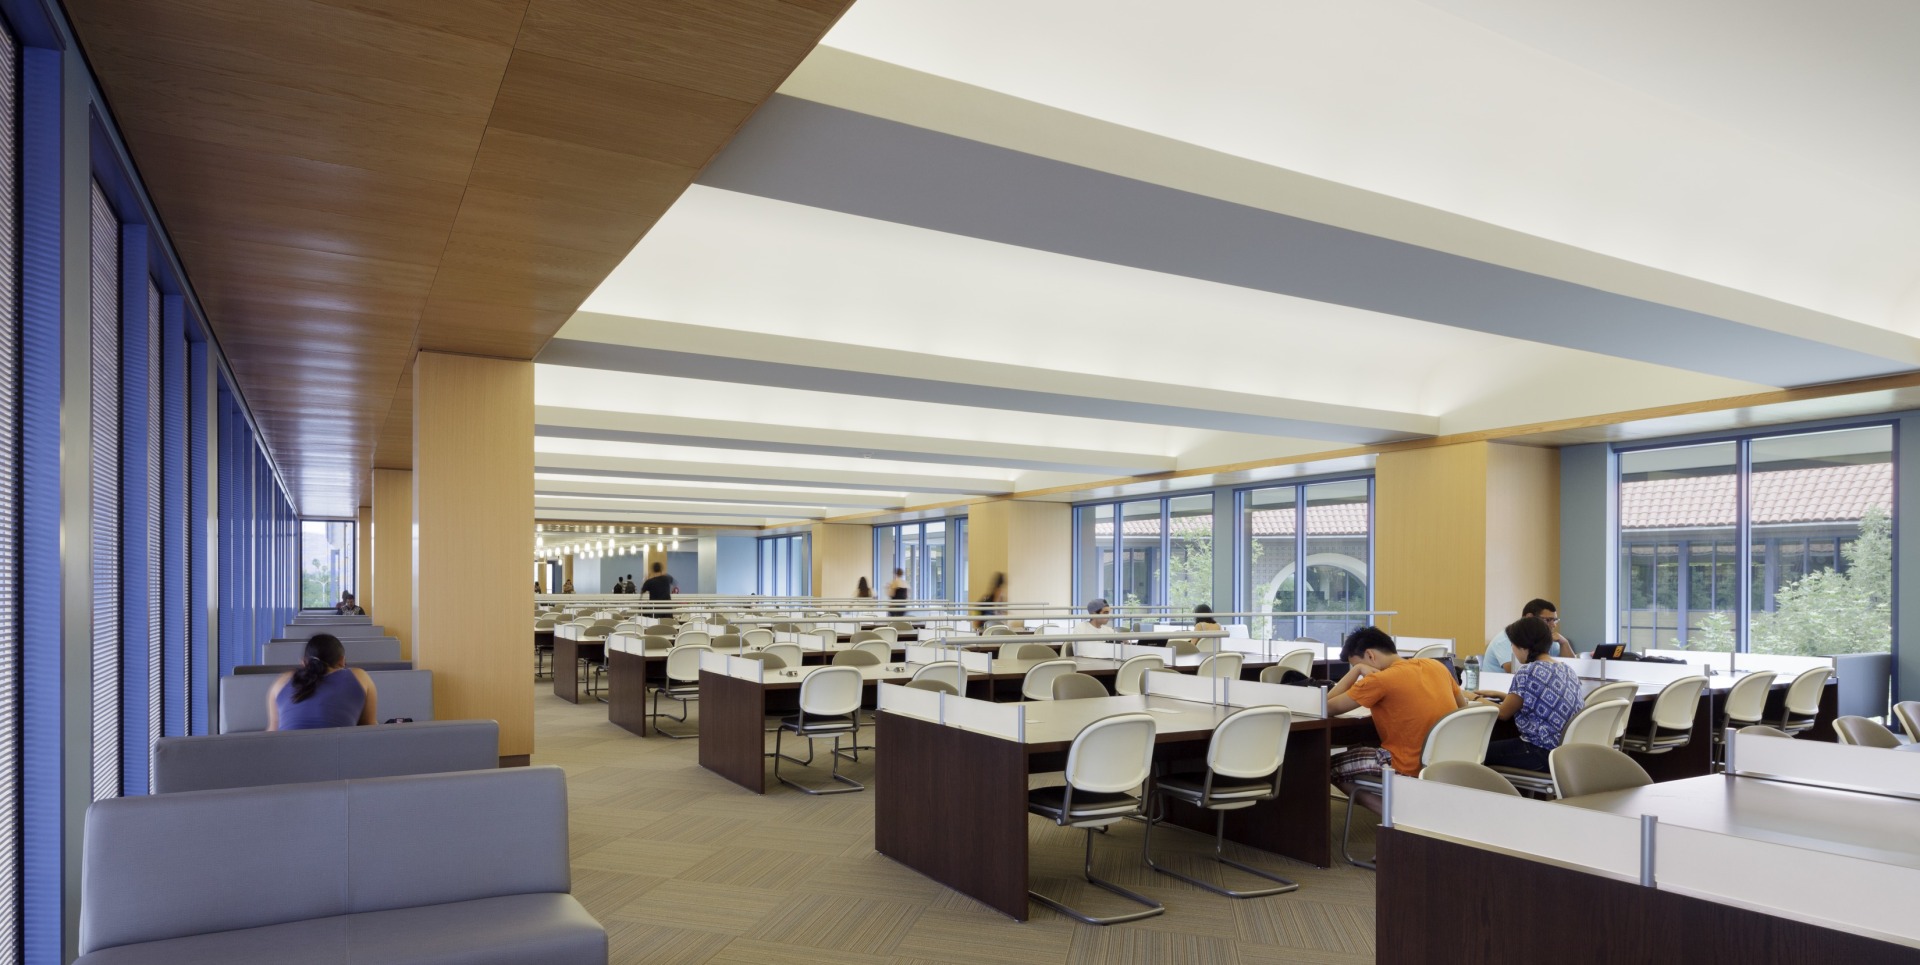 Energy-efficient building design of the Pierce College Library resulted in LEED Platinum recognition.